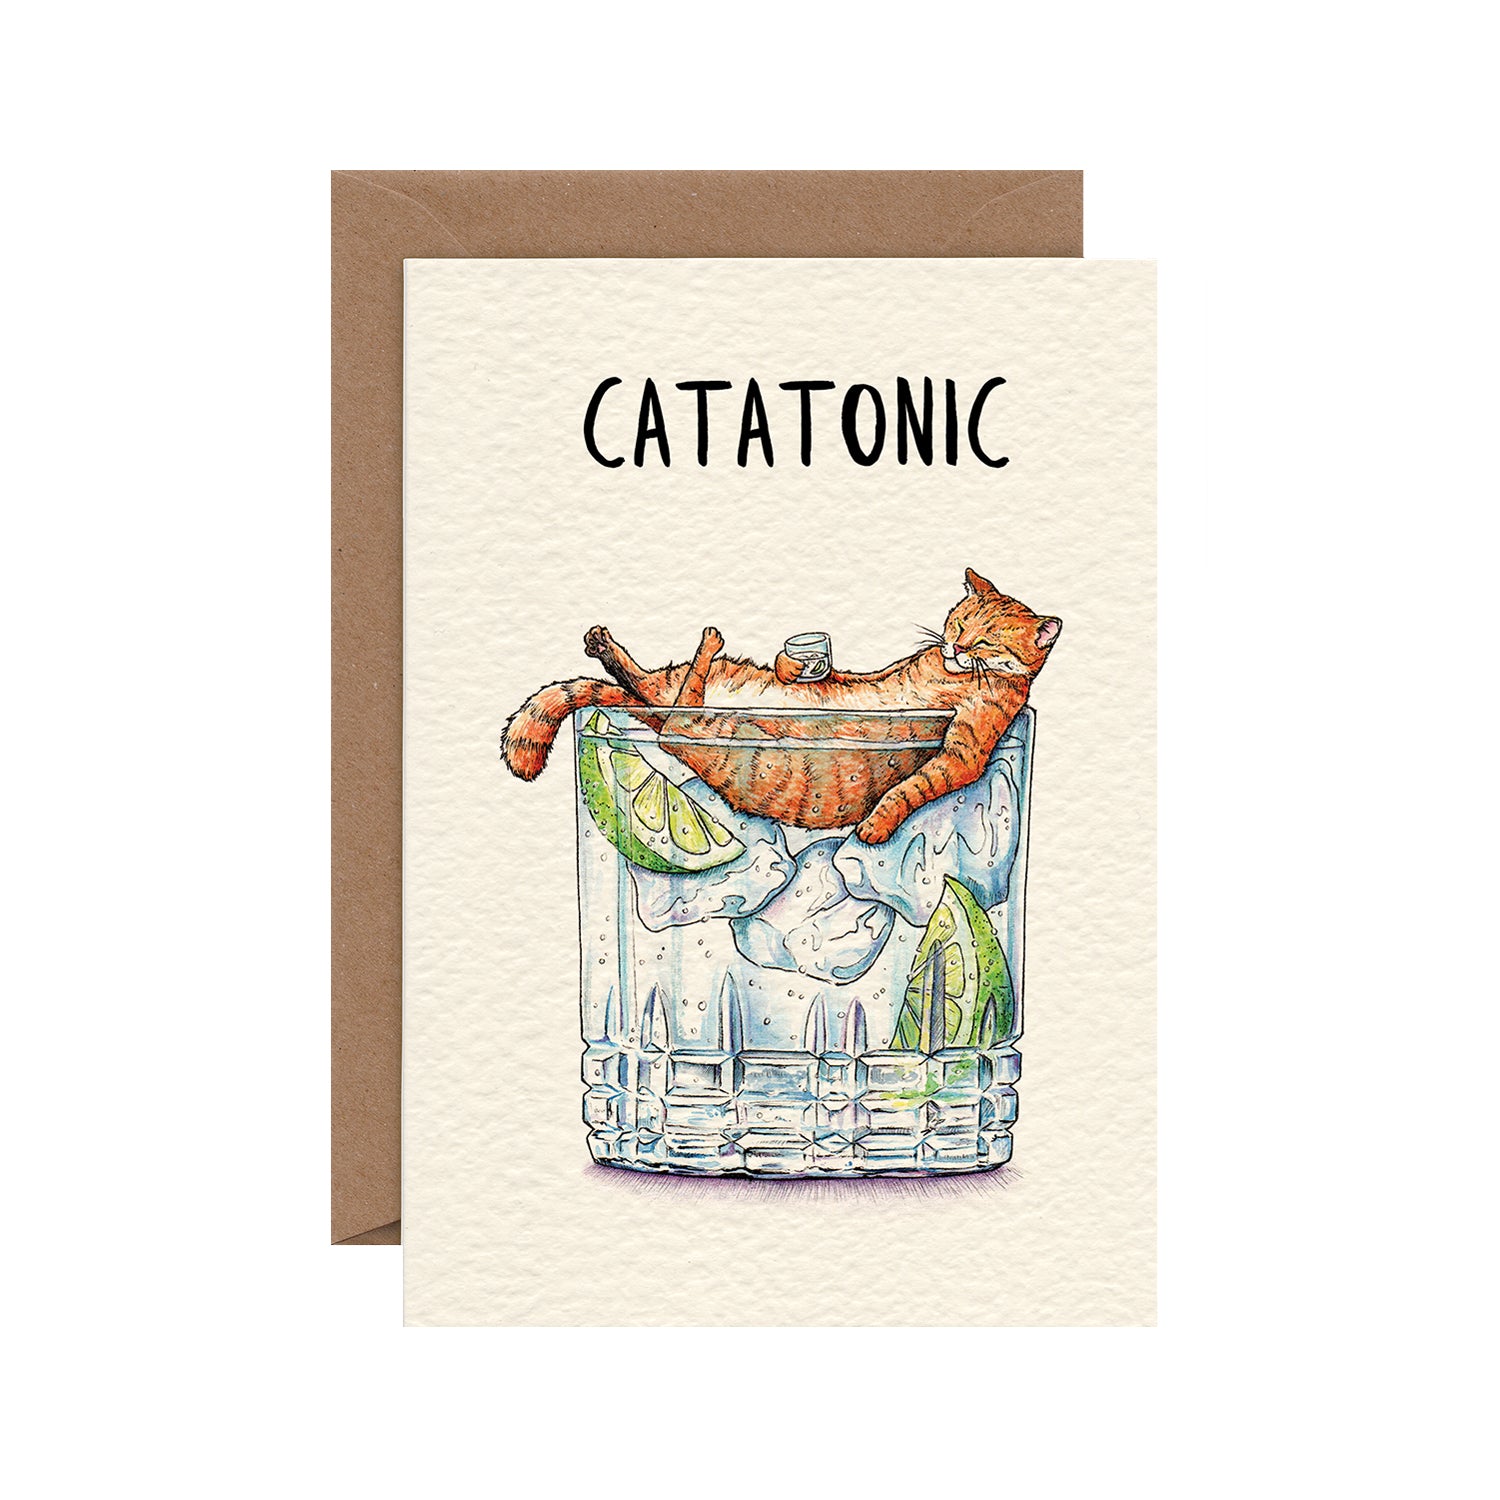 A Catatonic Card from Hester &amp; Cook, a cat-themed greeting card for gin lovers, featuring an adorable illustration of a cat resting on the ice of a cocktail.